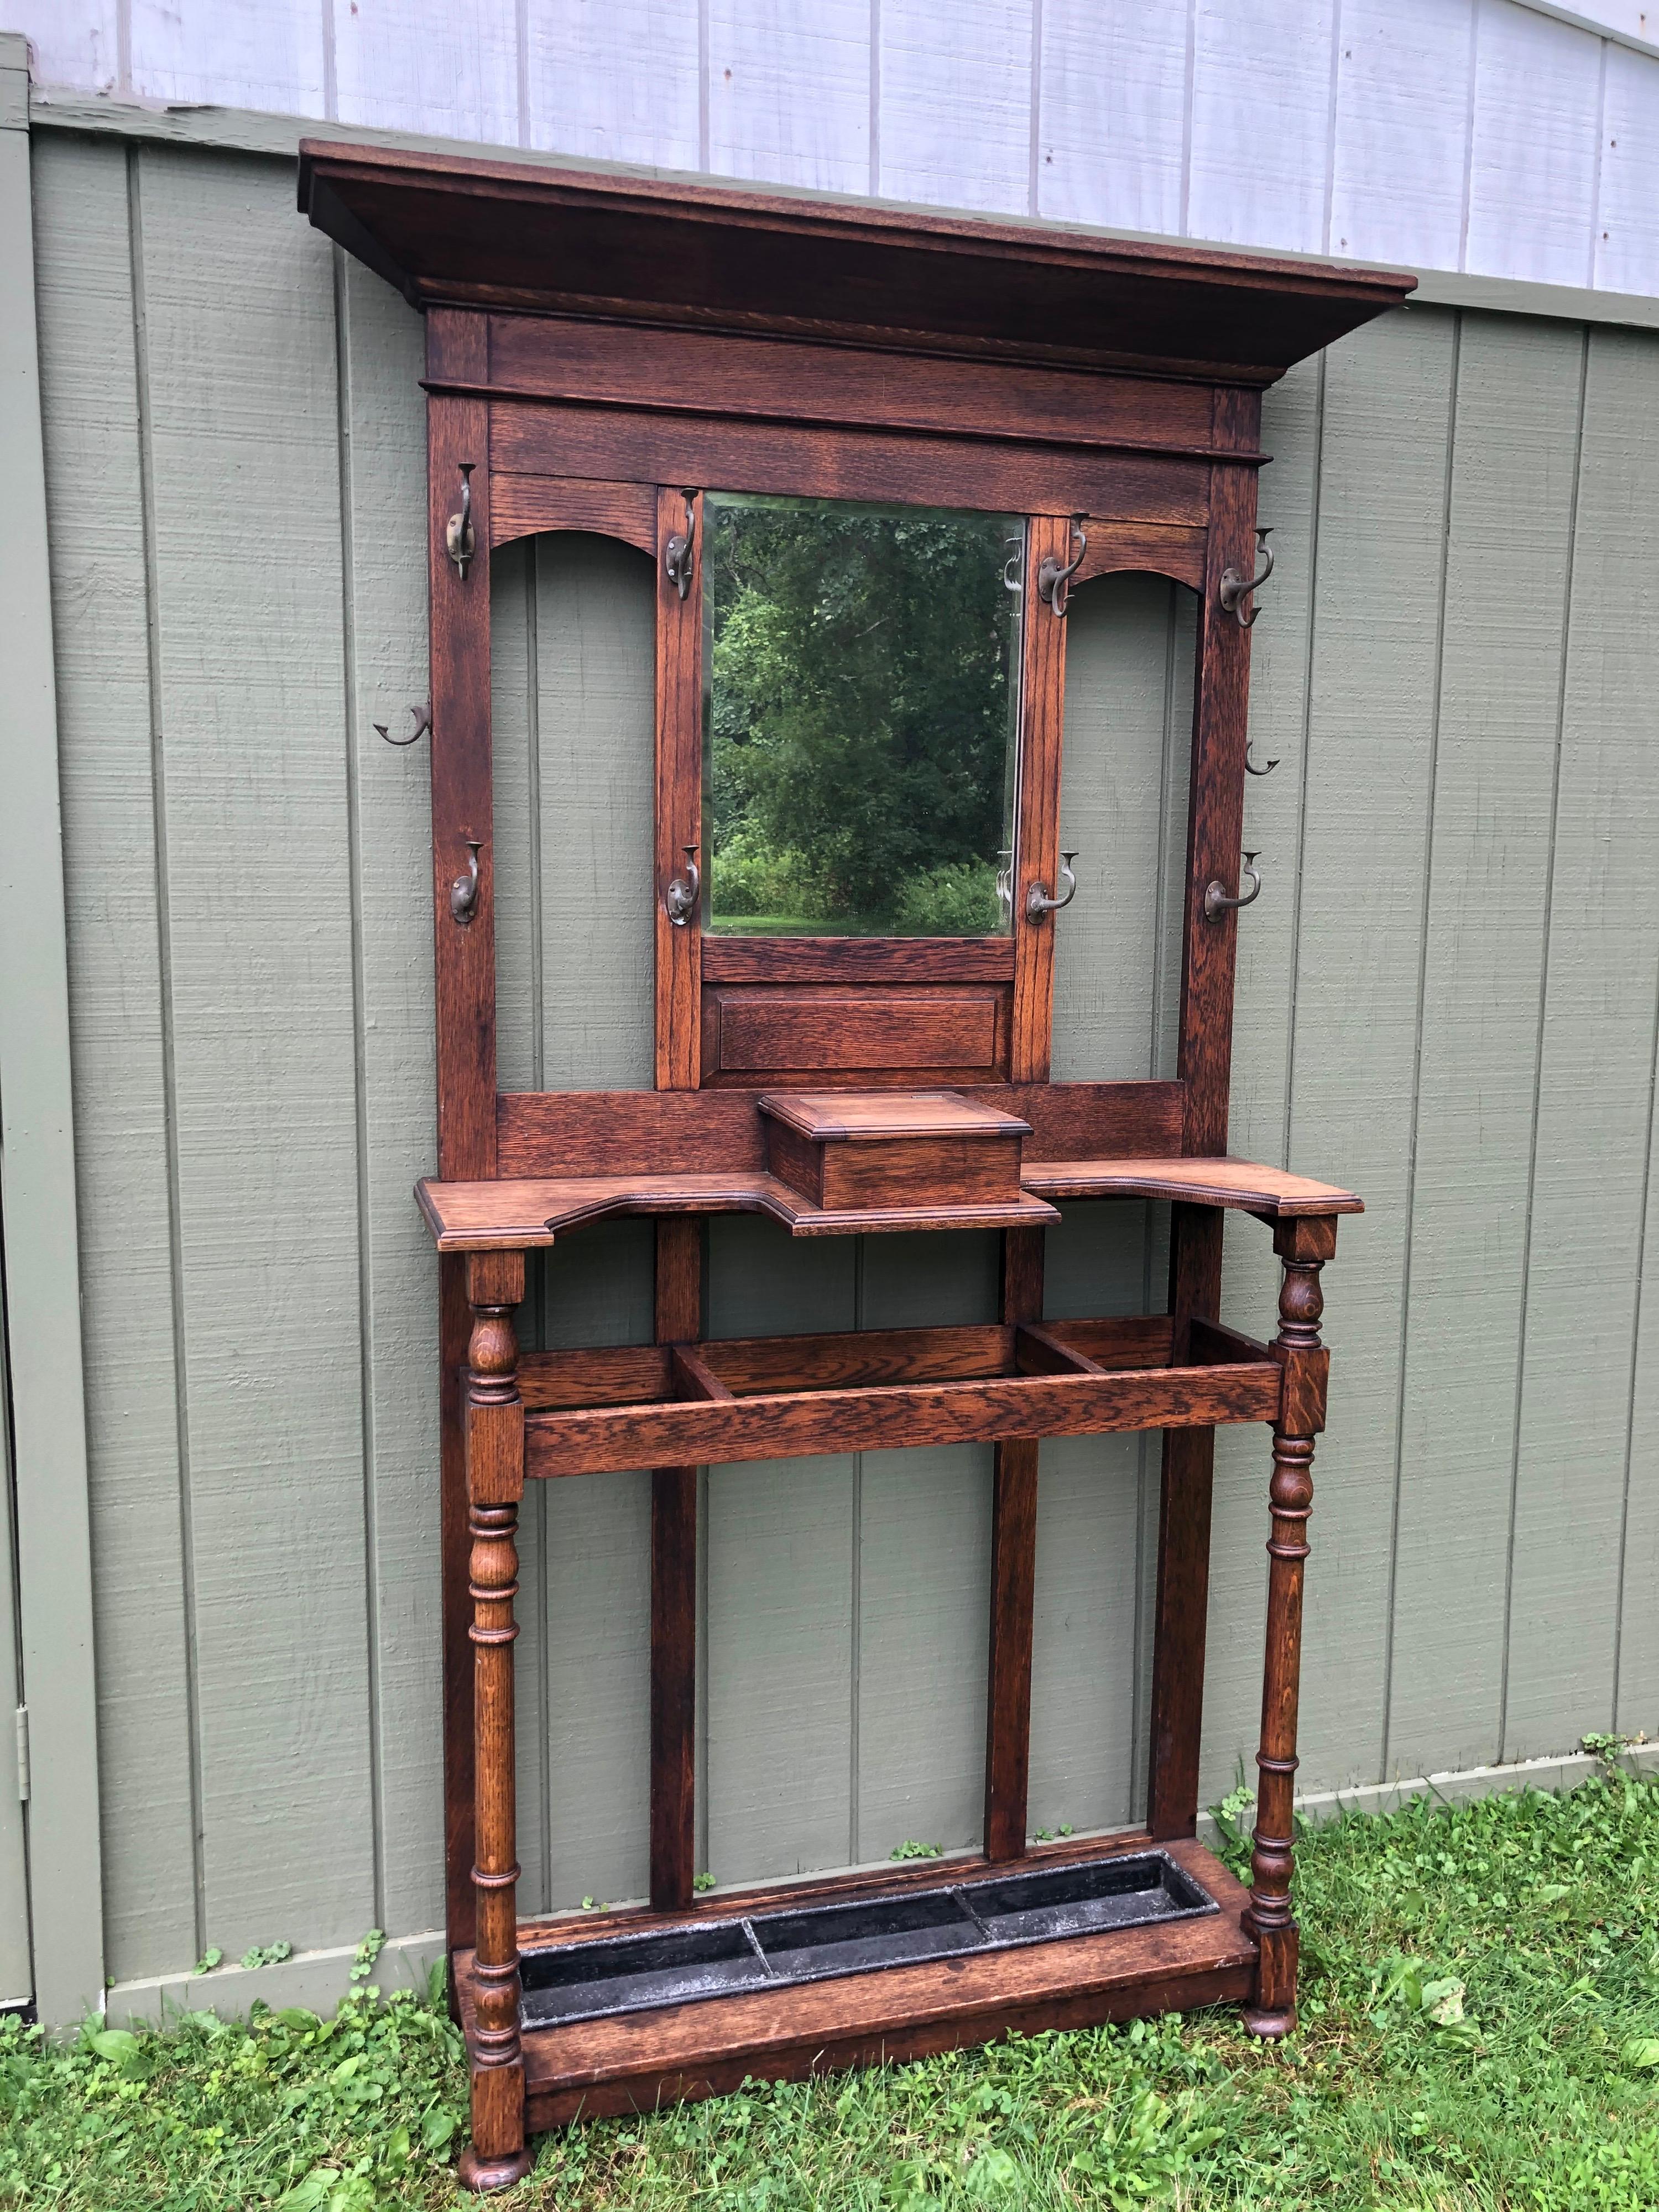 ON SALE-Antique oak hall tree with mirror. Excellent quality solid oak construction with original hooks. Perfect for a entry way or mudroom. Also would work in a walk in dressing room. You can move the side hooks or add extra hooks if needed along